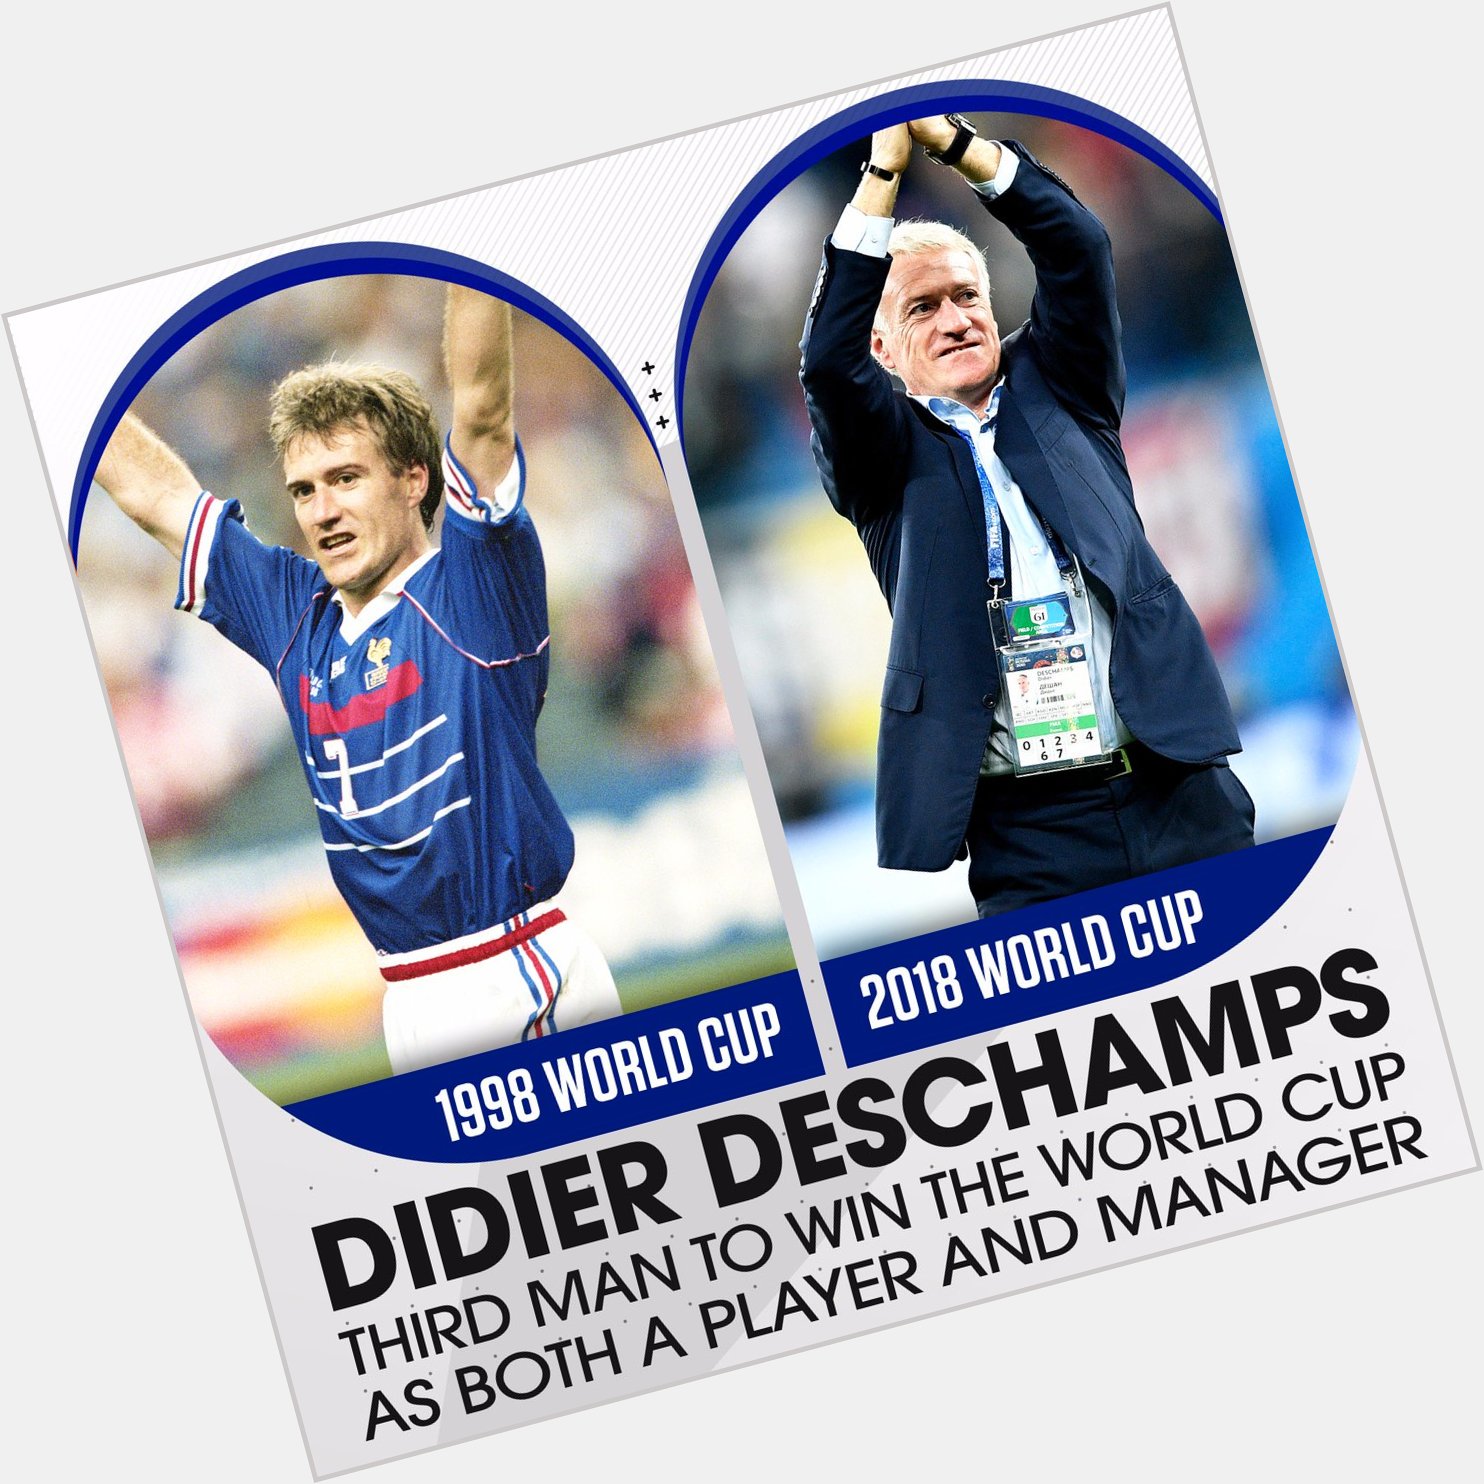 Happy birthday to Didier Deschamps! World Cup champion as both a player and a manager  